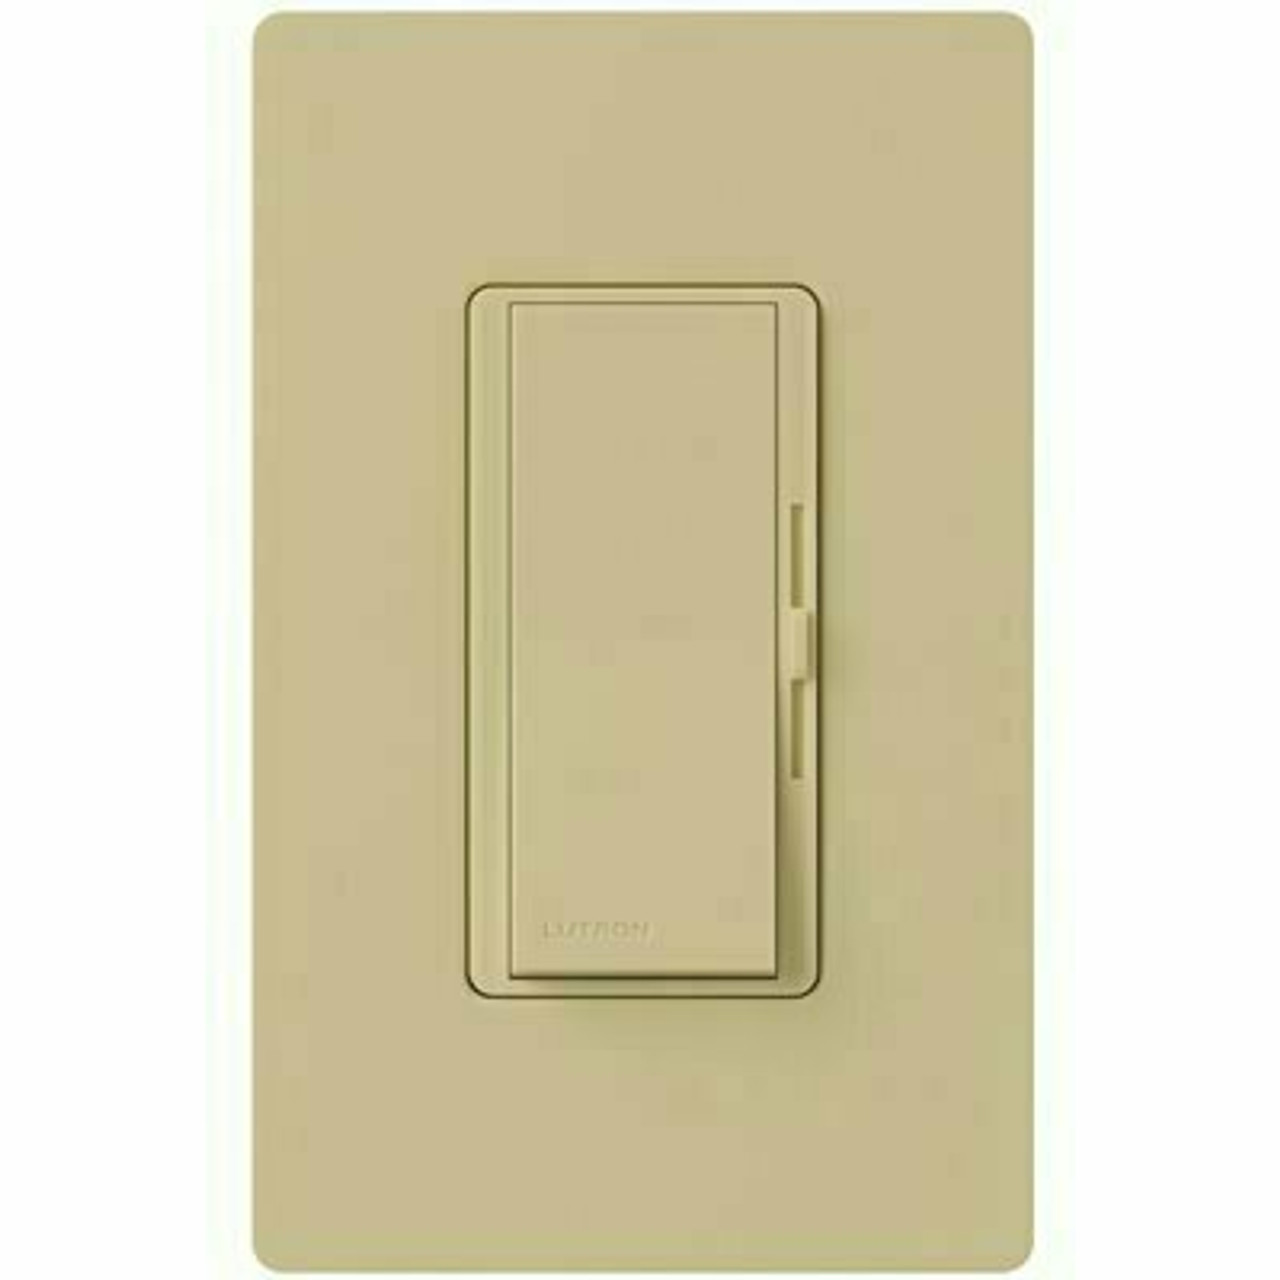 Lutron Single-Pole/3-Way Diva Led+ Dimmer Switch For Dimmable Led, Halogen And Incandescent Bulbs, Ivory